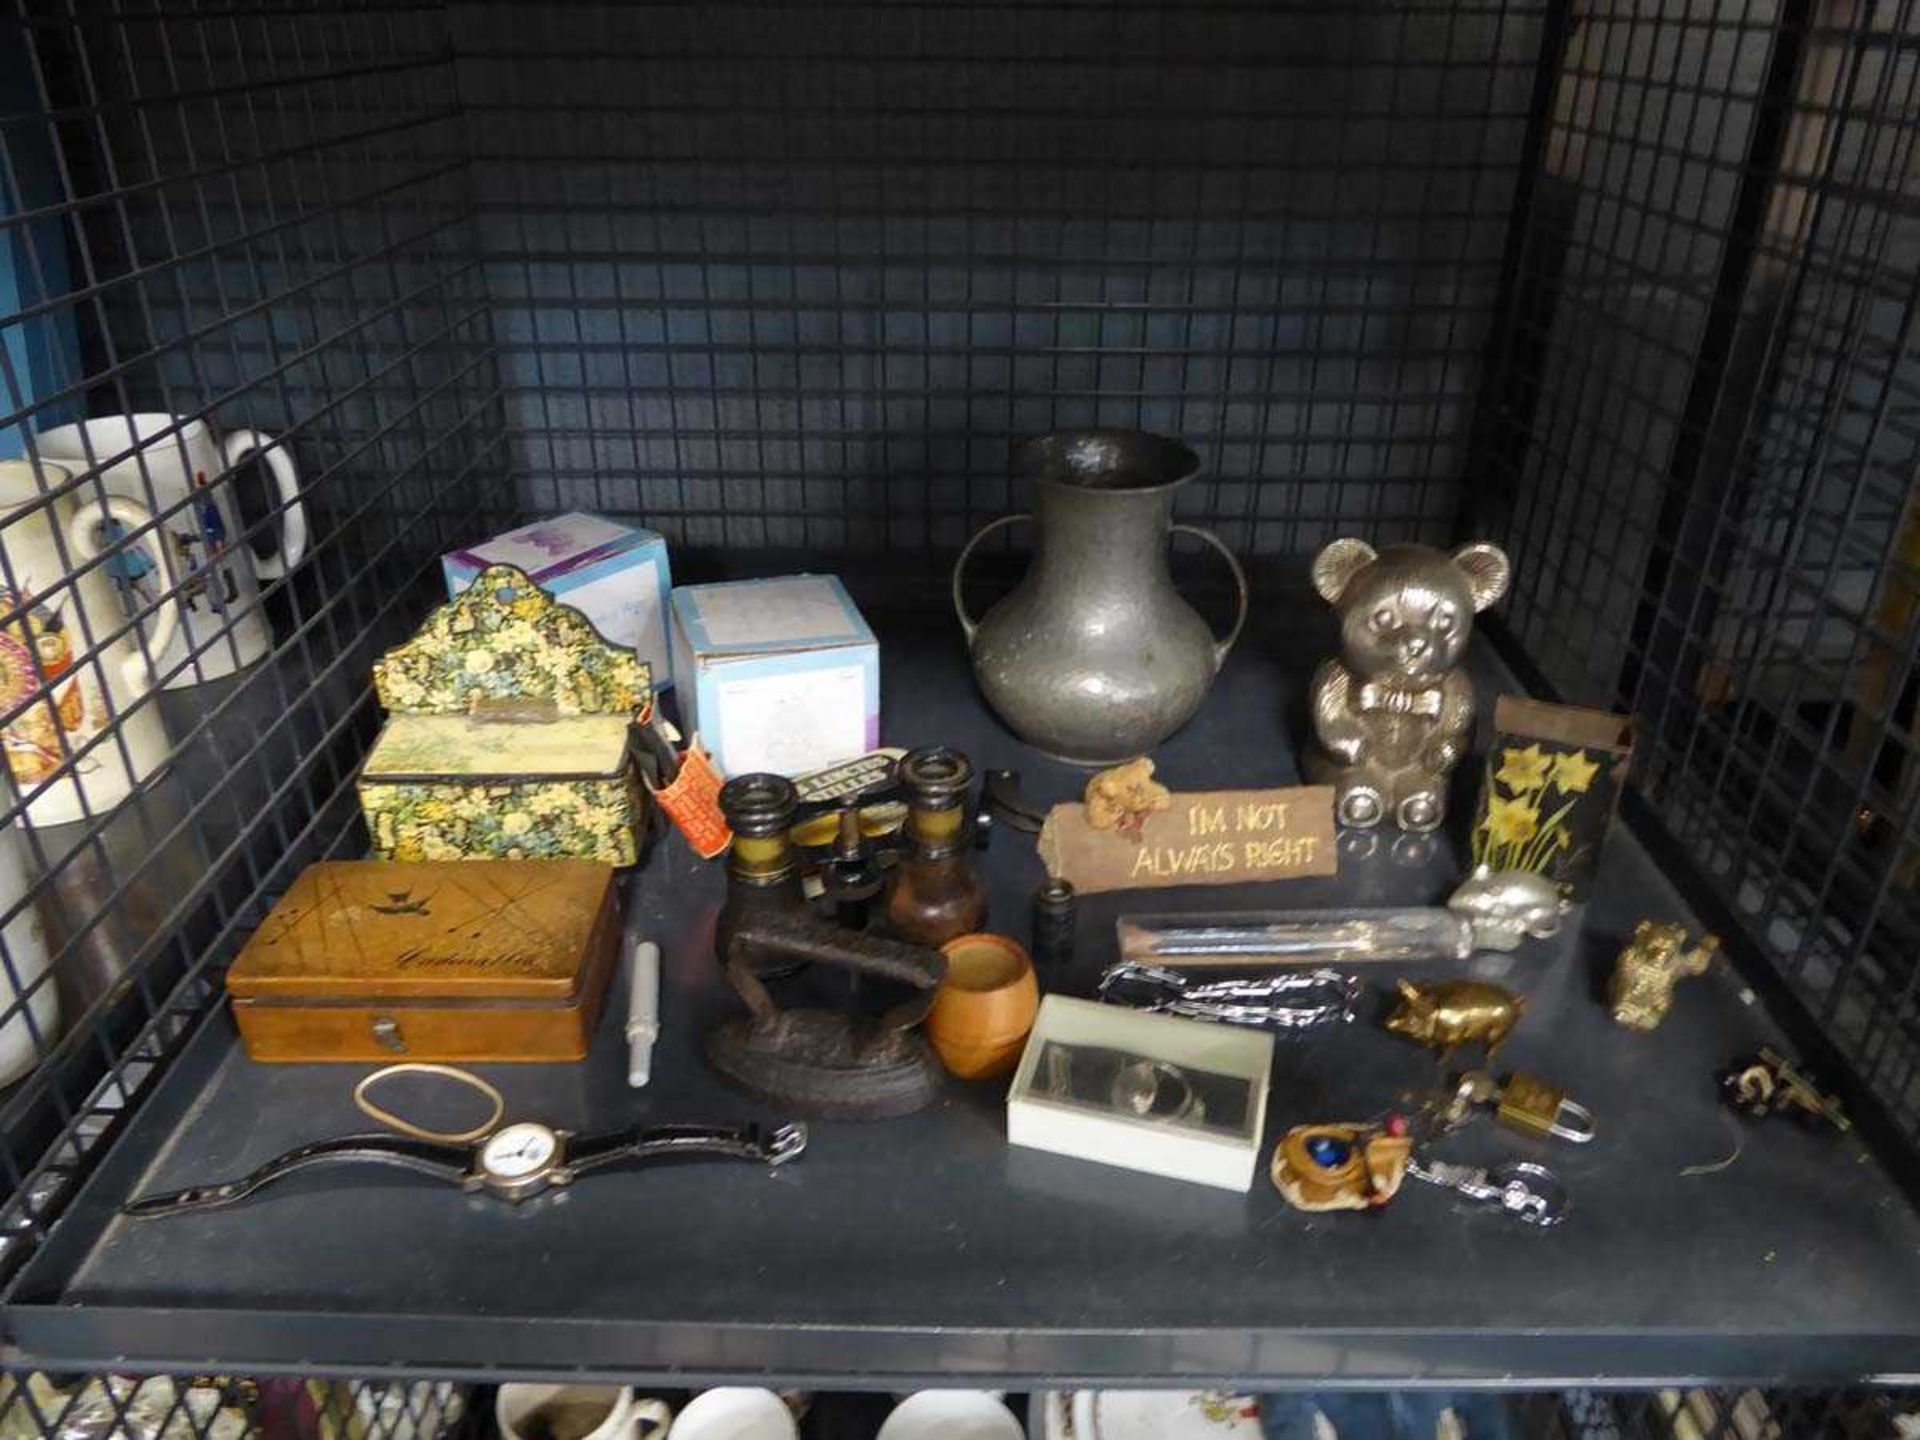 Cage containing pewter vases, opera glasses, miniature flat iron, ornaments and trinket boxes